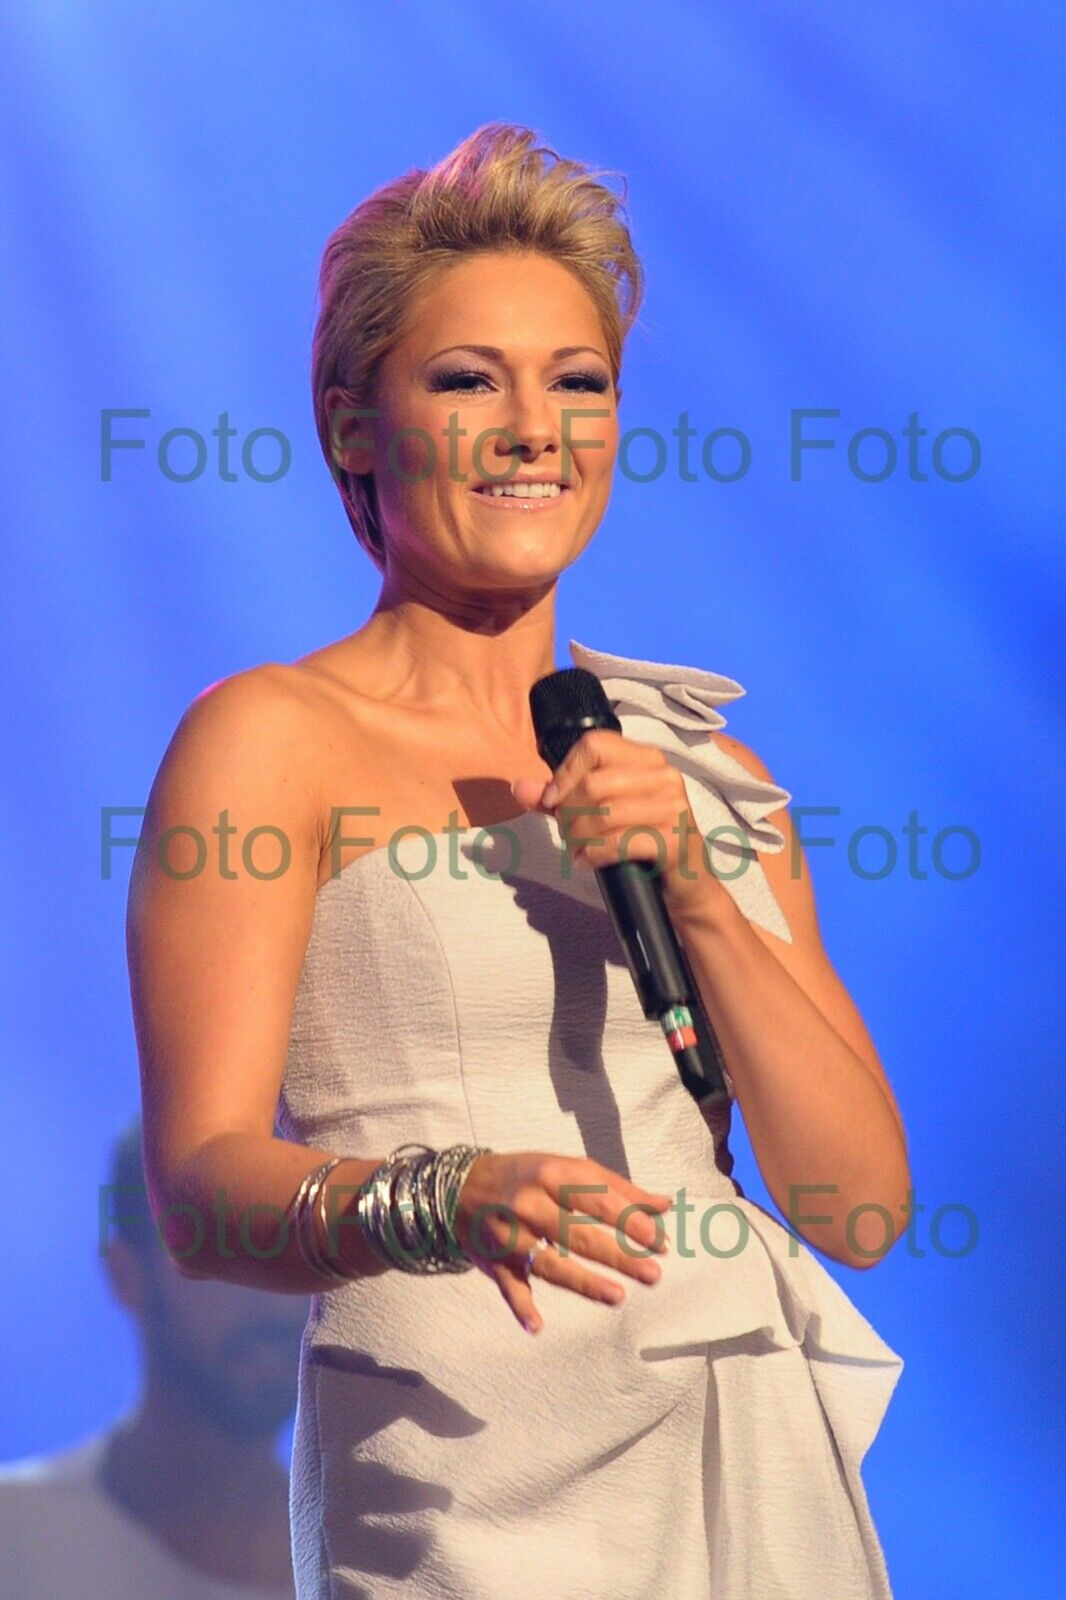 Helene Fischer Pop Songs Music TV Photo Poster painting 20 X 30 CM Without Autograph (Be-76